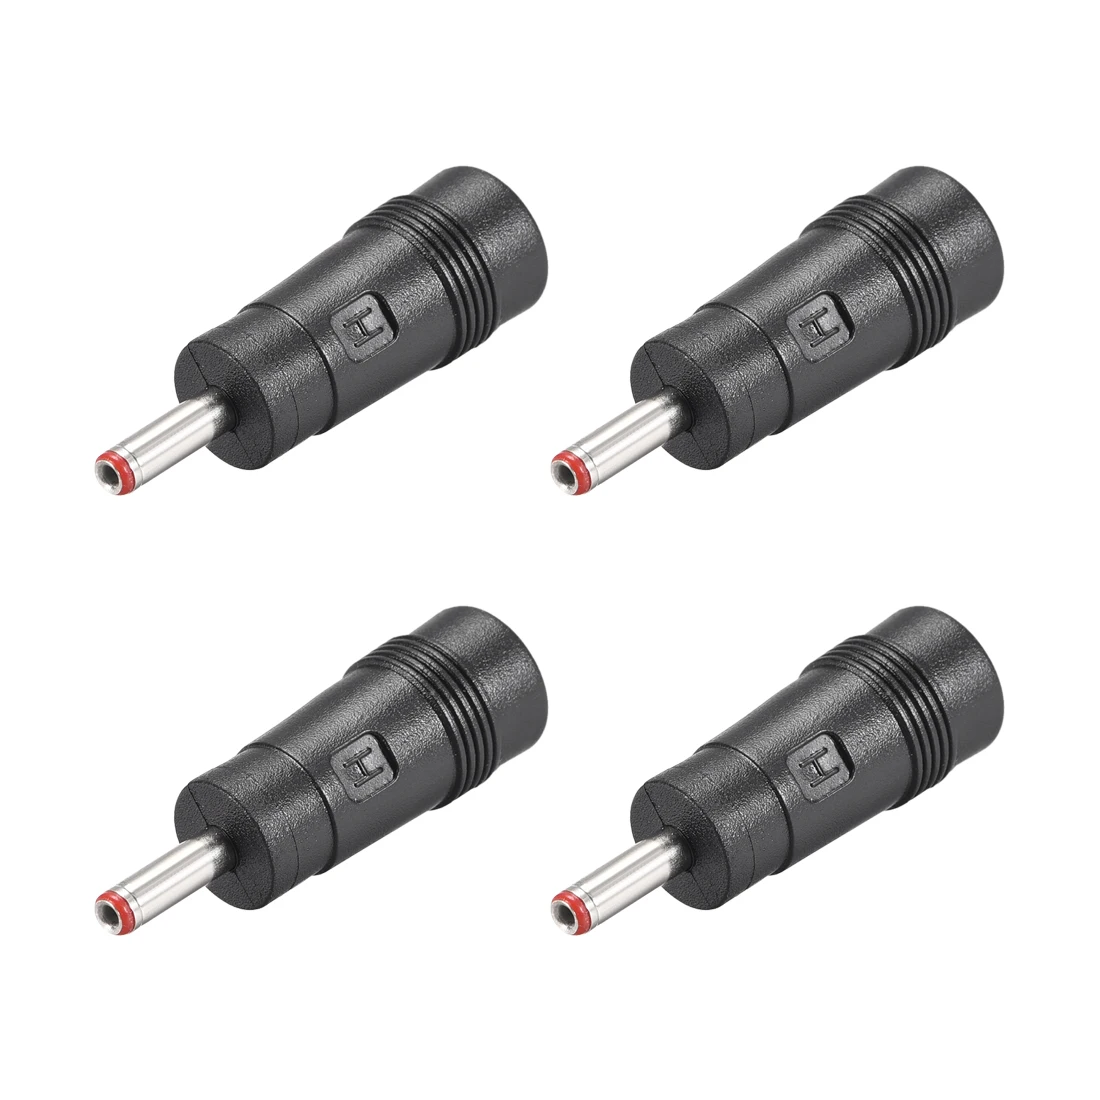 uxcell 4pcs DC Power Adapter,Female 5.5mmx2.5mm to 3.5mmx1.35mm Male Plug Tips, Input DC Plug Connector Red